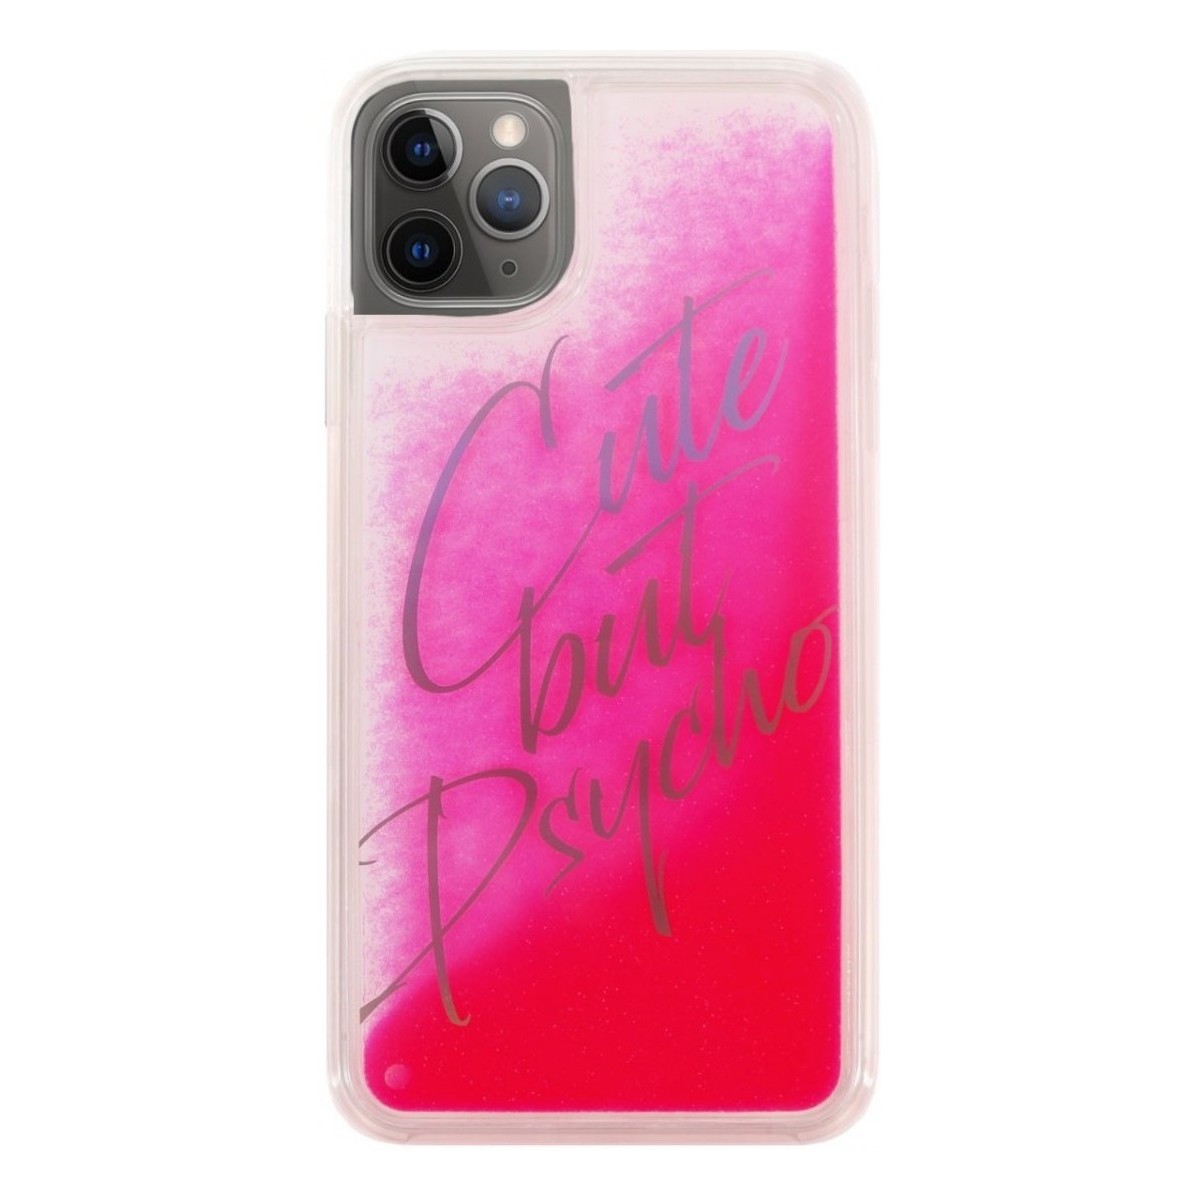 Borse Fodere cellulare Benjamins Cover Cute But Psycho iPhone 11 Pro Max Rosa Rosa